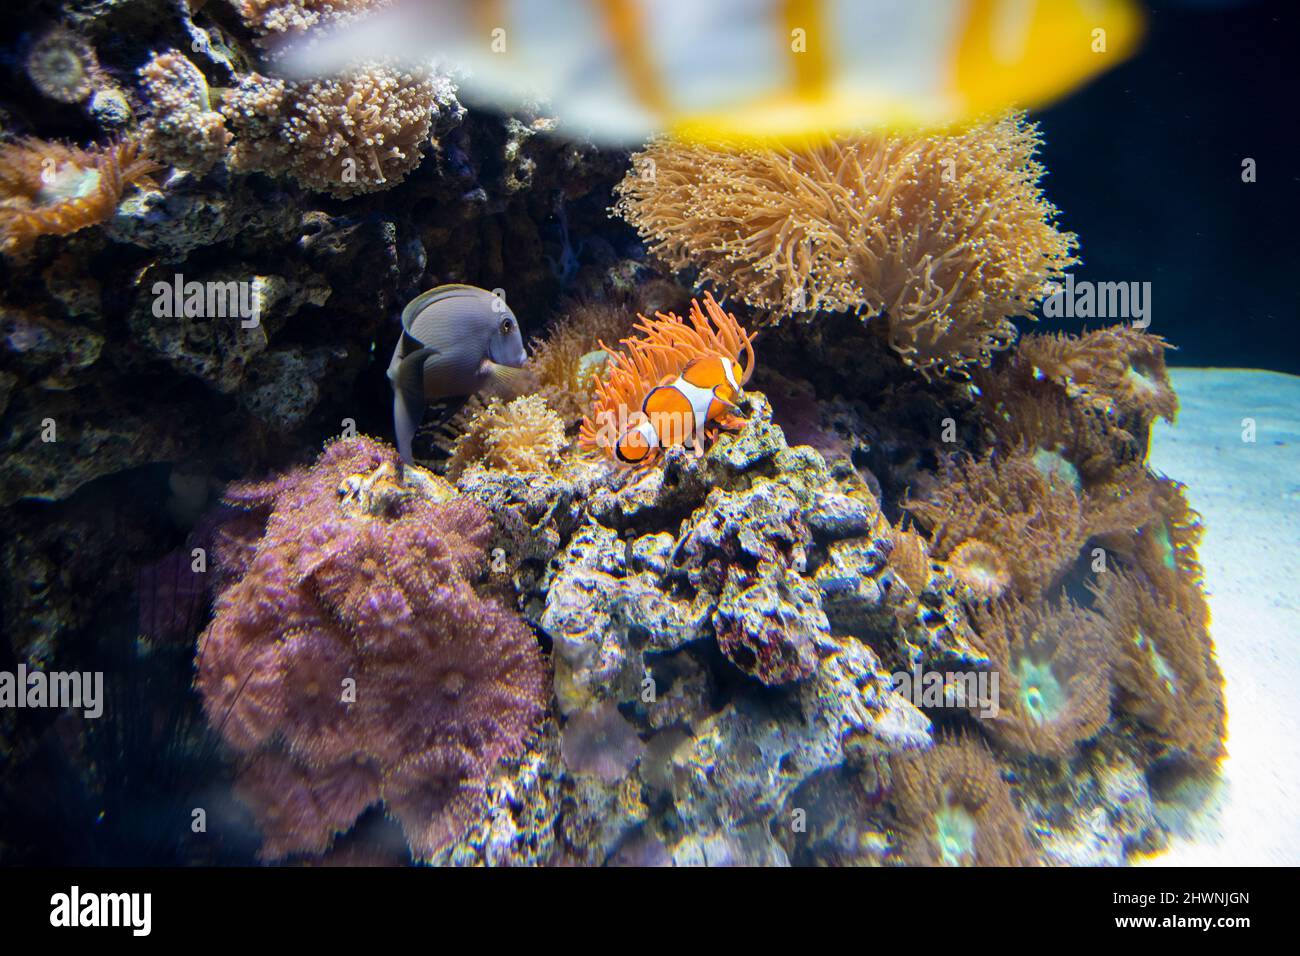 Clownfish or anemonefish,are fishes from the subfamily Amphiprioninae in the family Pomacentridae,  they form symbiotic mutualisms with sea anemones. Stock Photo